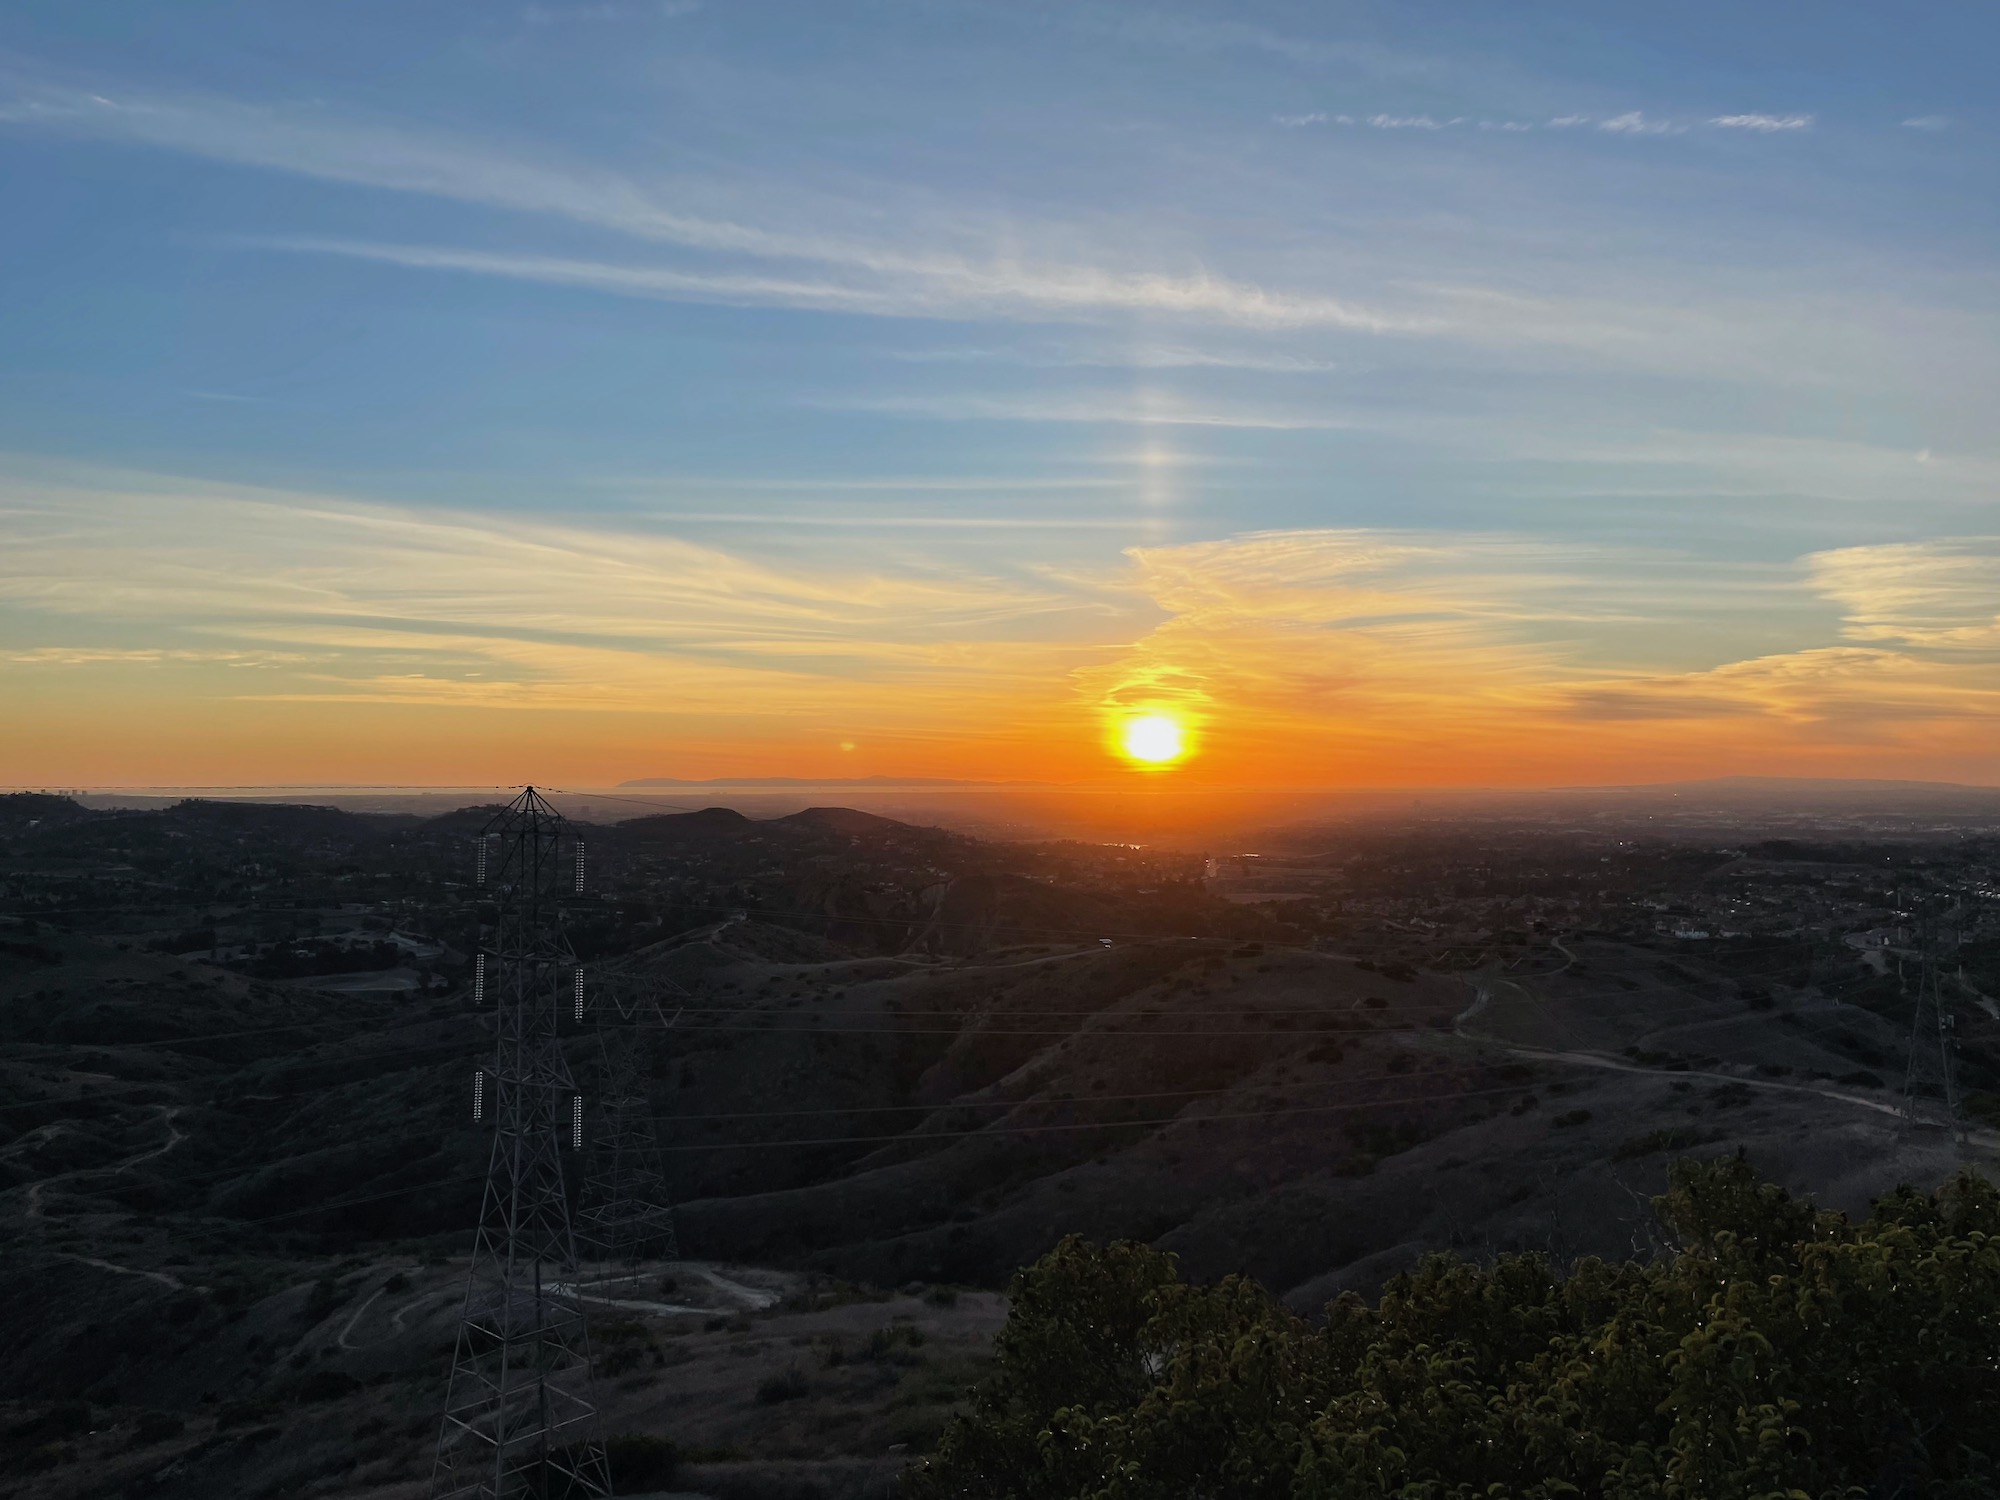 Sunset over pacific ocean - robbers roost vantage point - anaheim hills -19